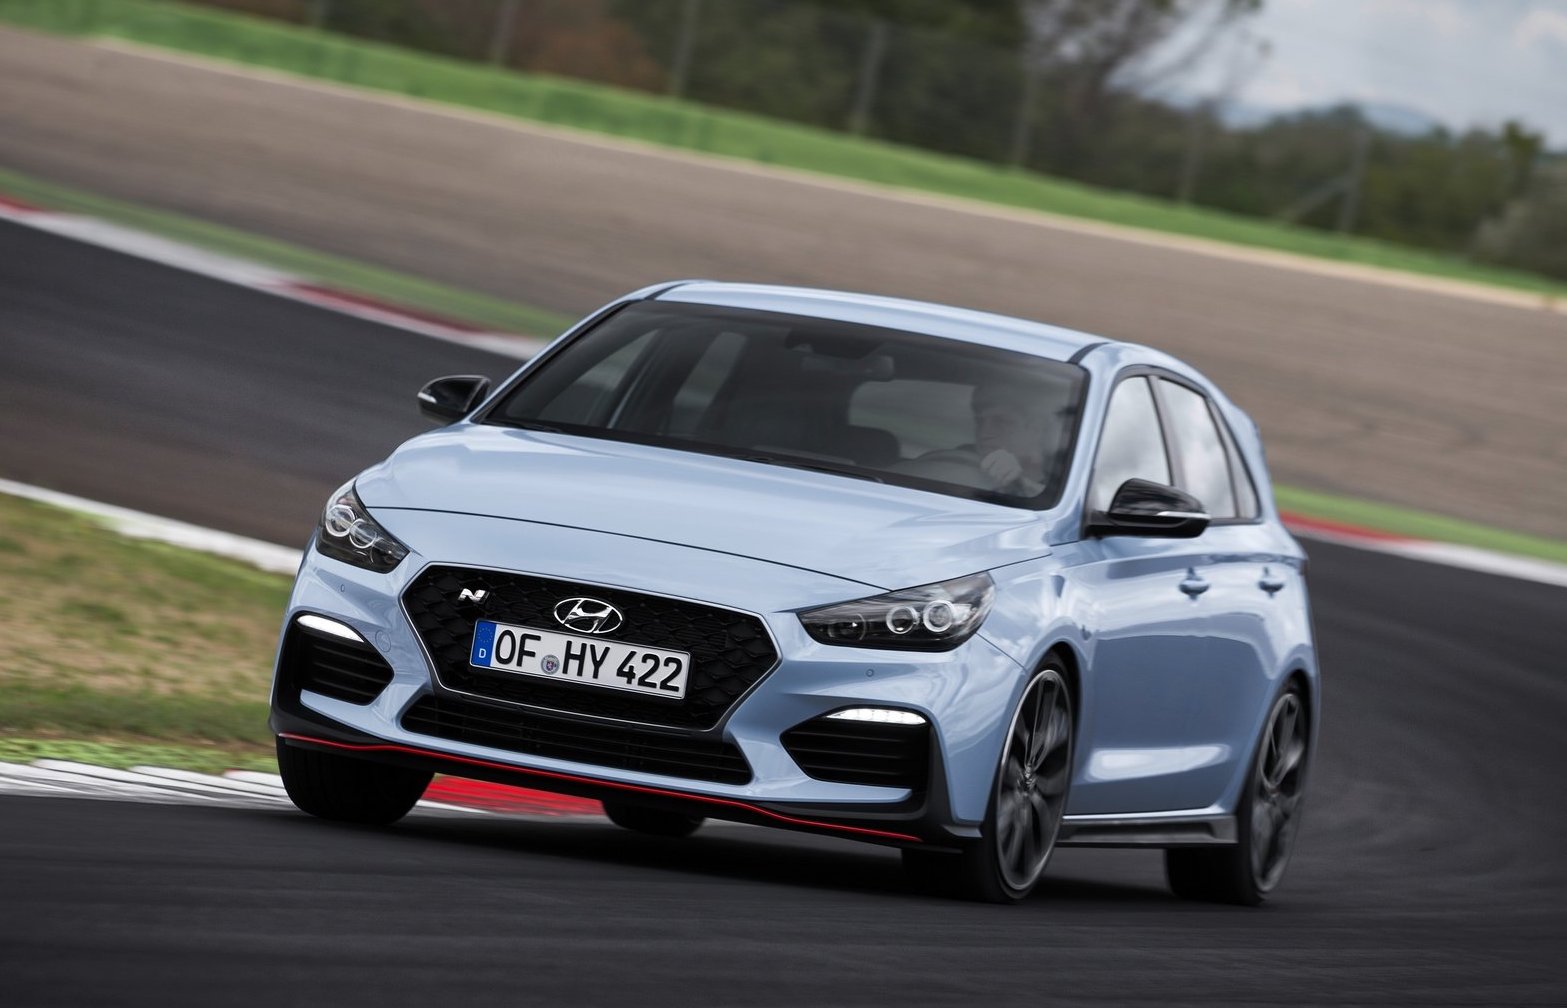 2018 Hyundai i30 N on sale in April from $39,990